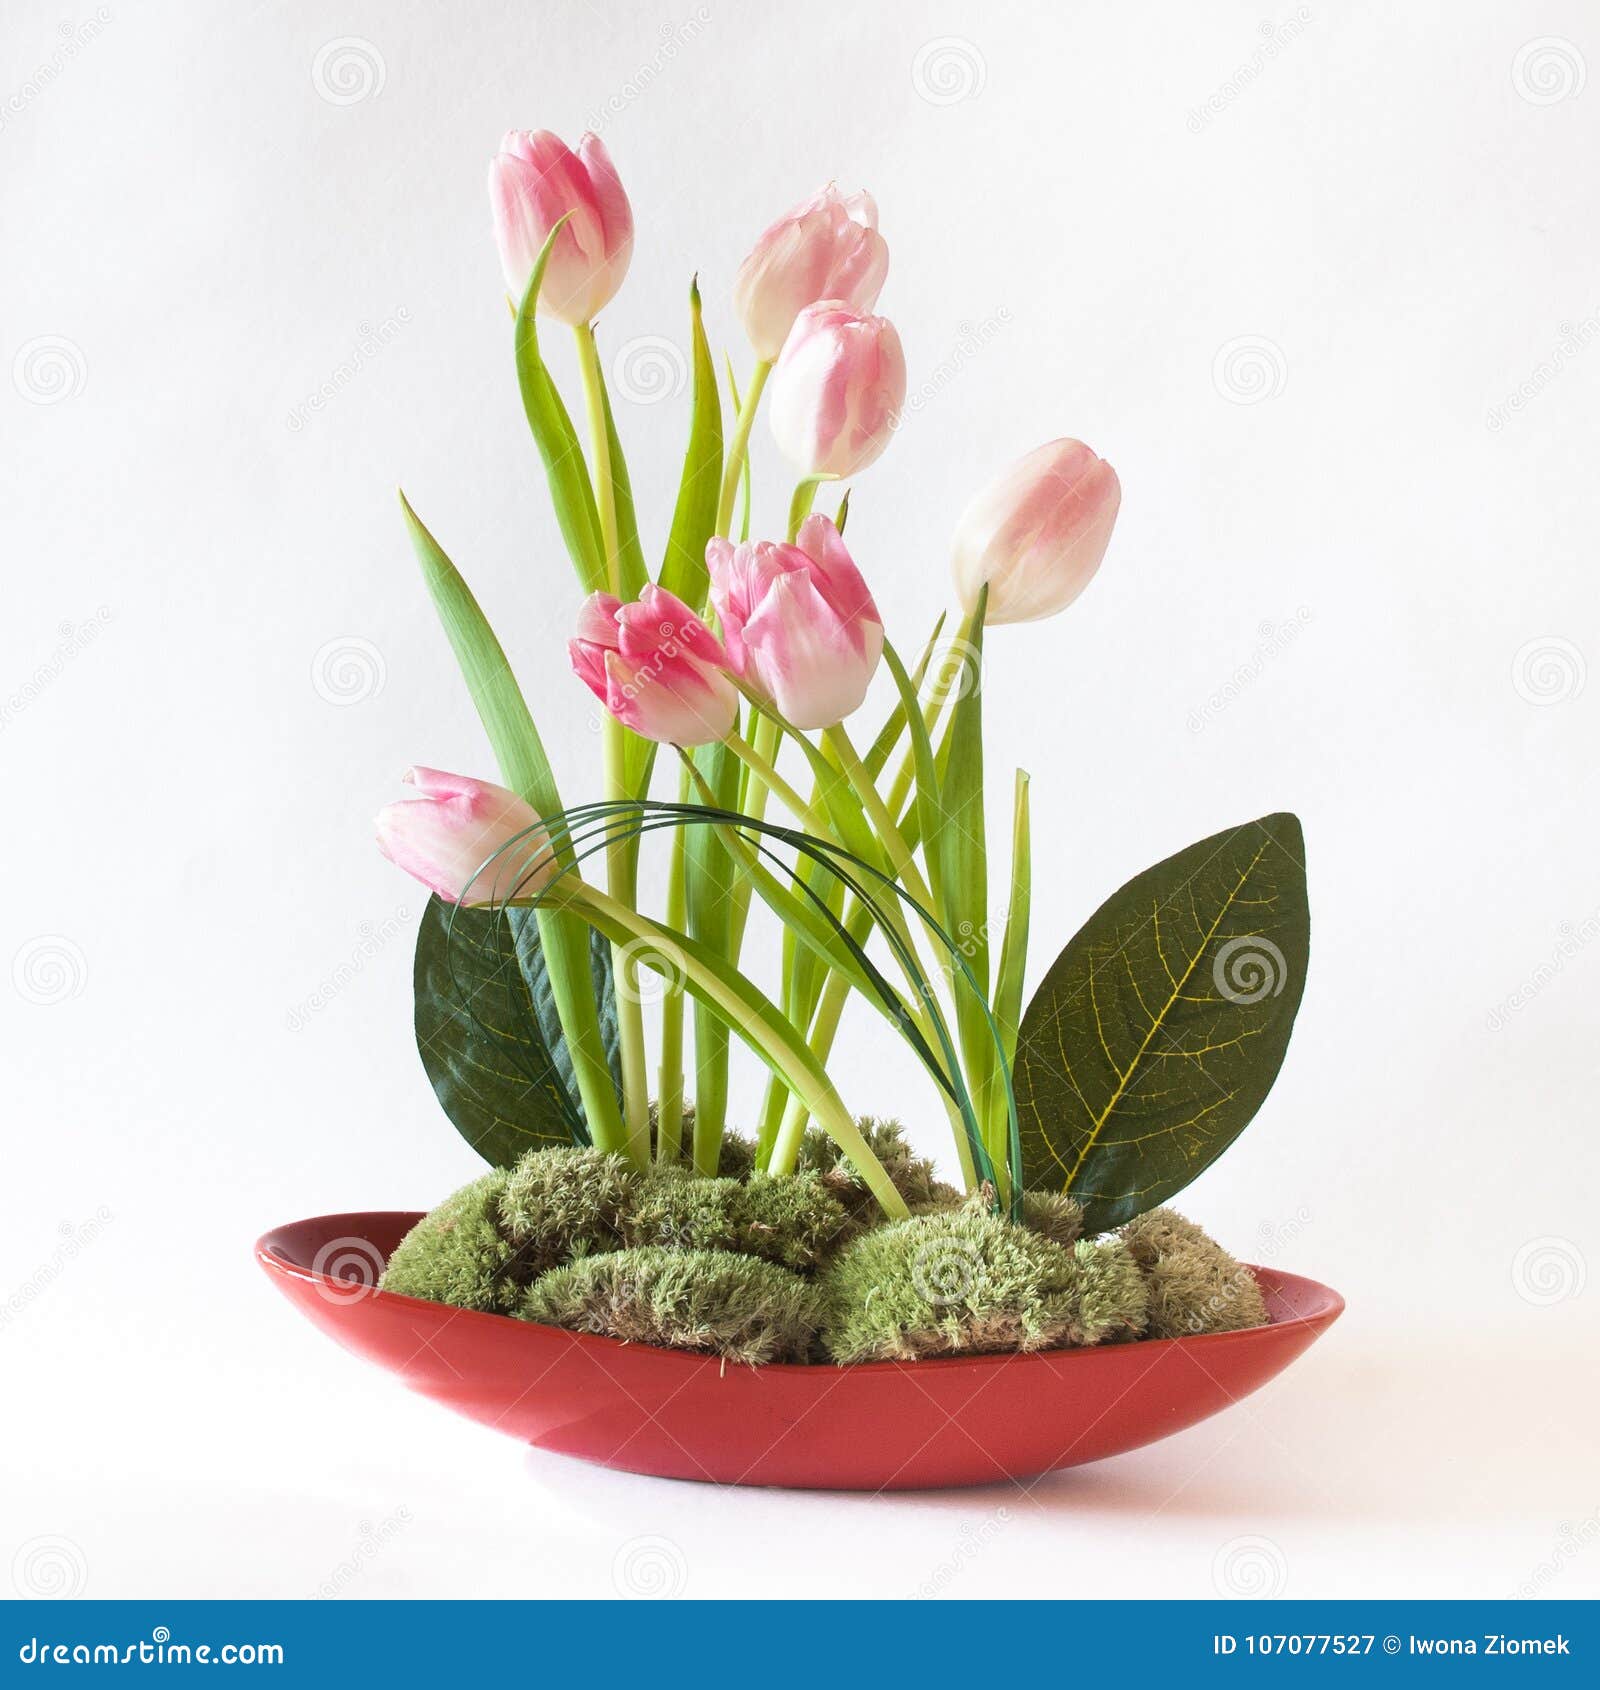 artistic flower arrangement with pink tulips